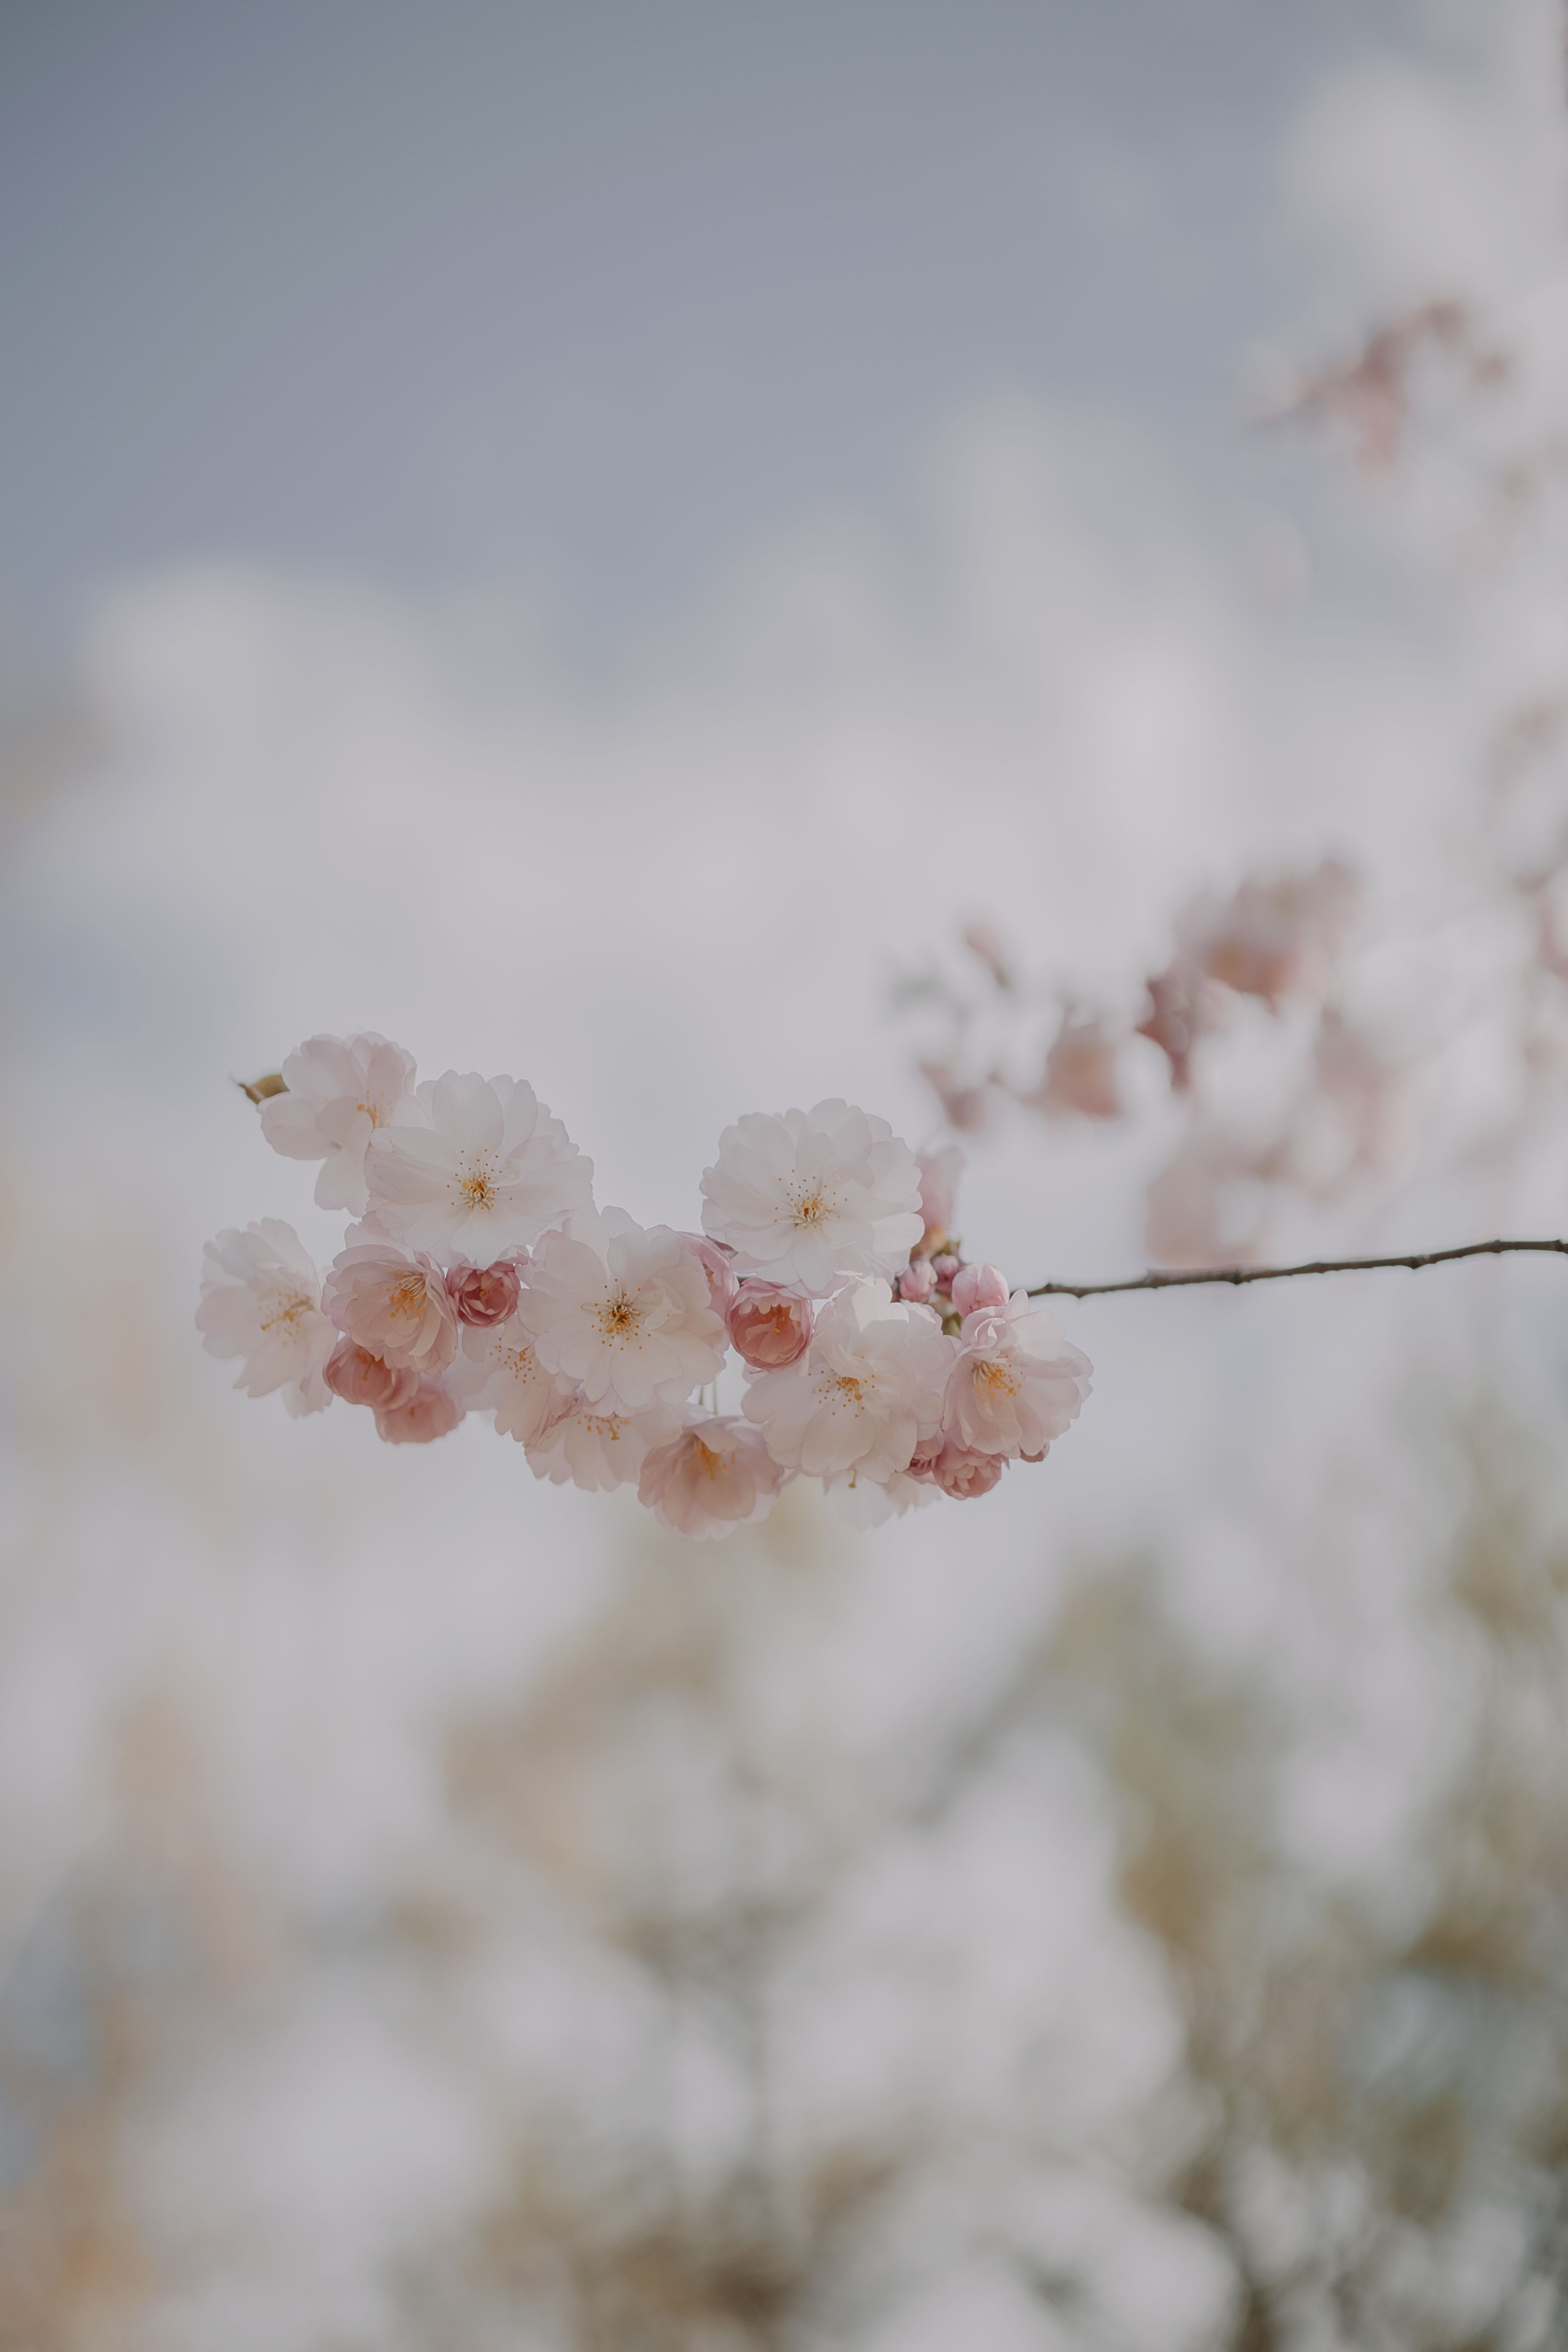 A branch of a tree with white flowers - Cherry blossom